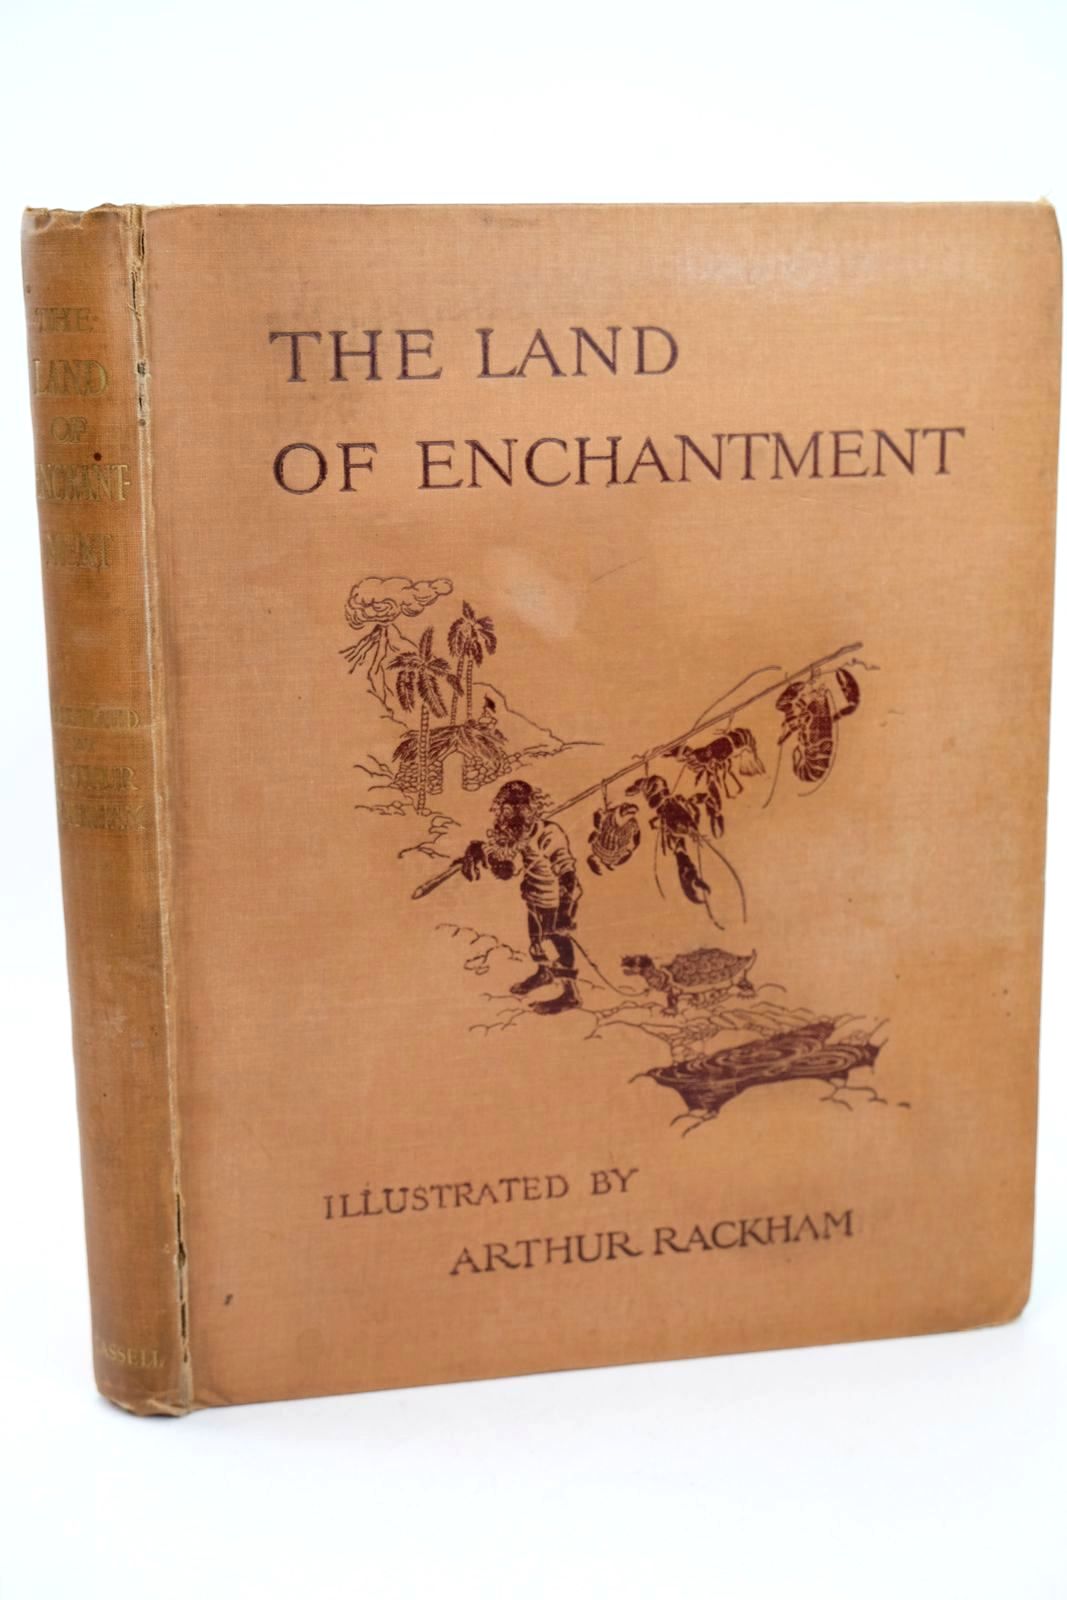 Photo of THE LAND OF ENCHANTMENT written by Bonser, A.E.
Woolf, Sidney
Bucheim, E.S. illustrated by Rackham, Arthur published by Cassell & Co. Ltd. (STOCK CODE: 1318504)  for sale by Stella & Rose's Books